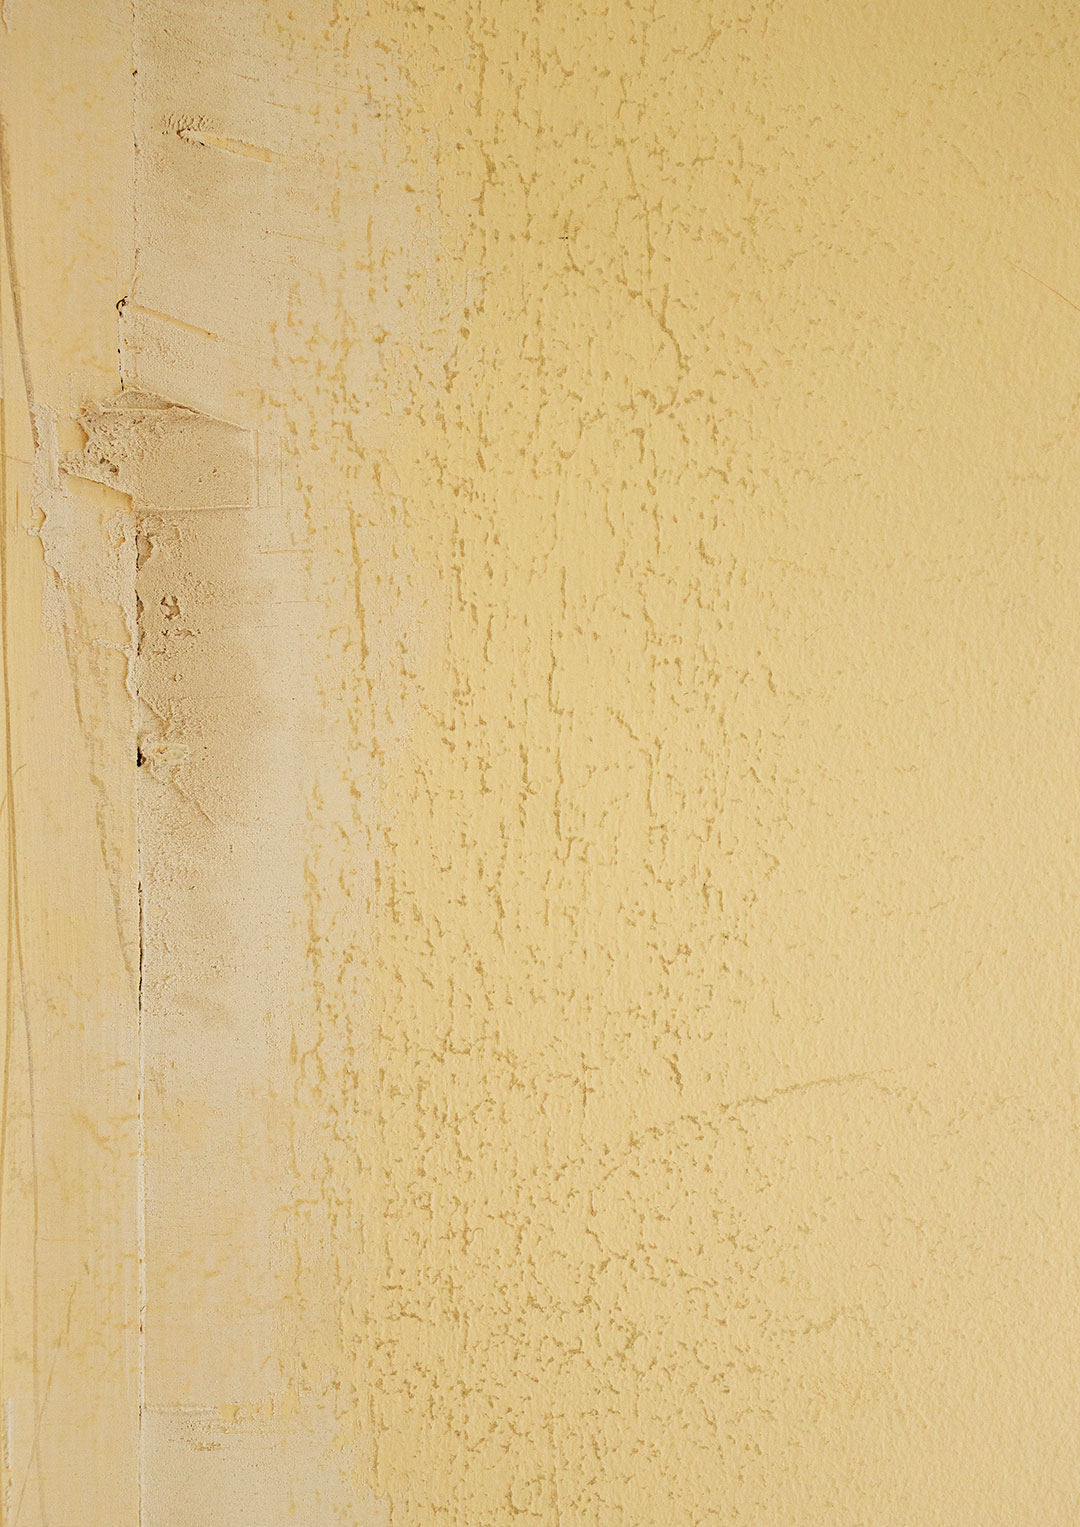 Photo of rough plastering on wall